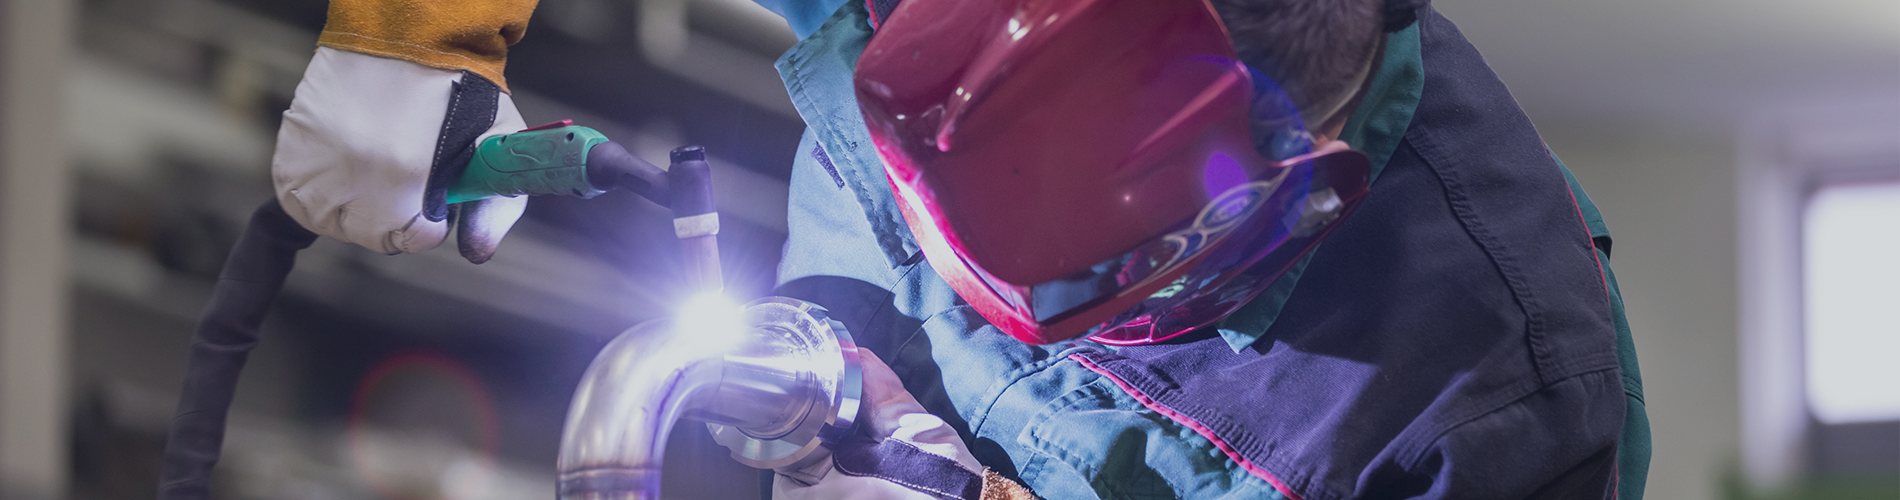 Skilled welder crafting precise welds with protective gear